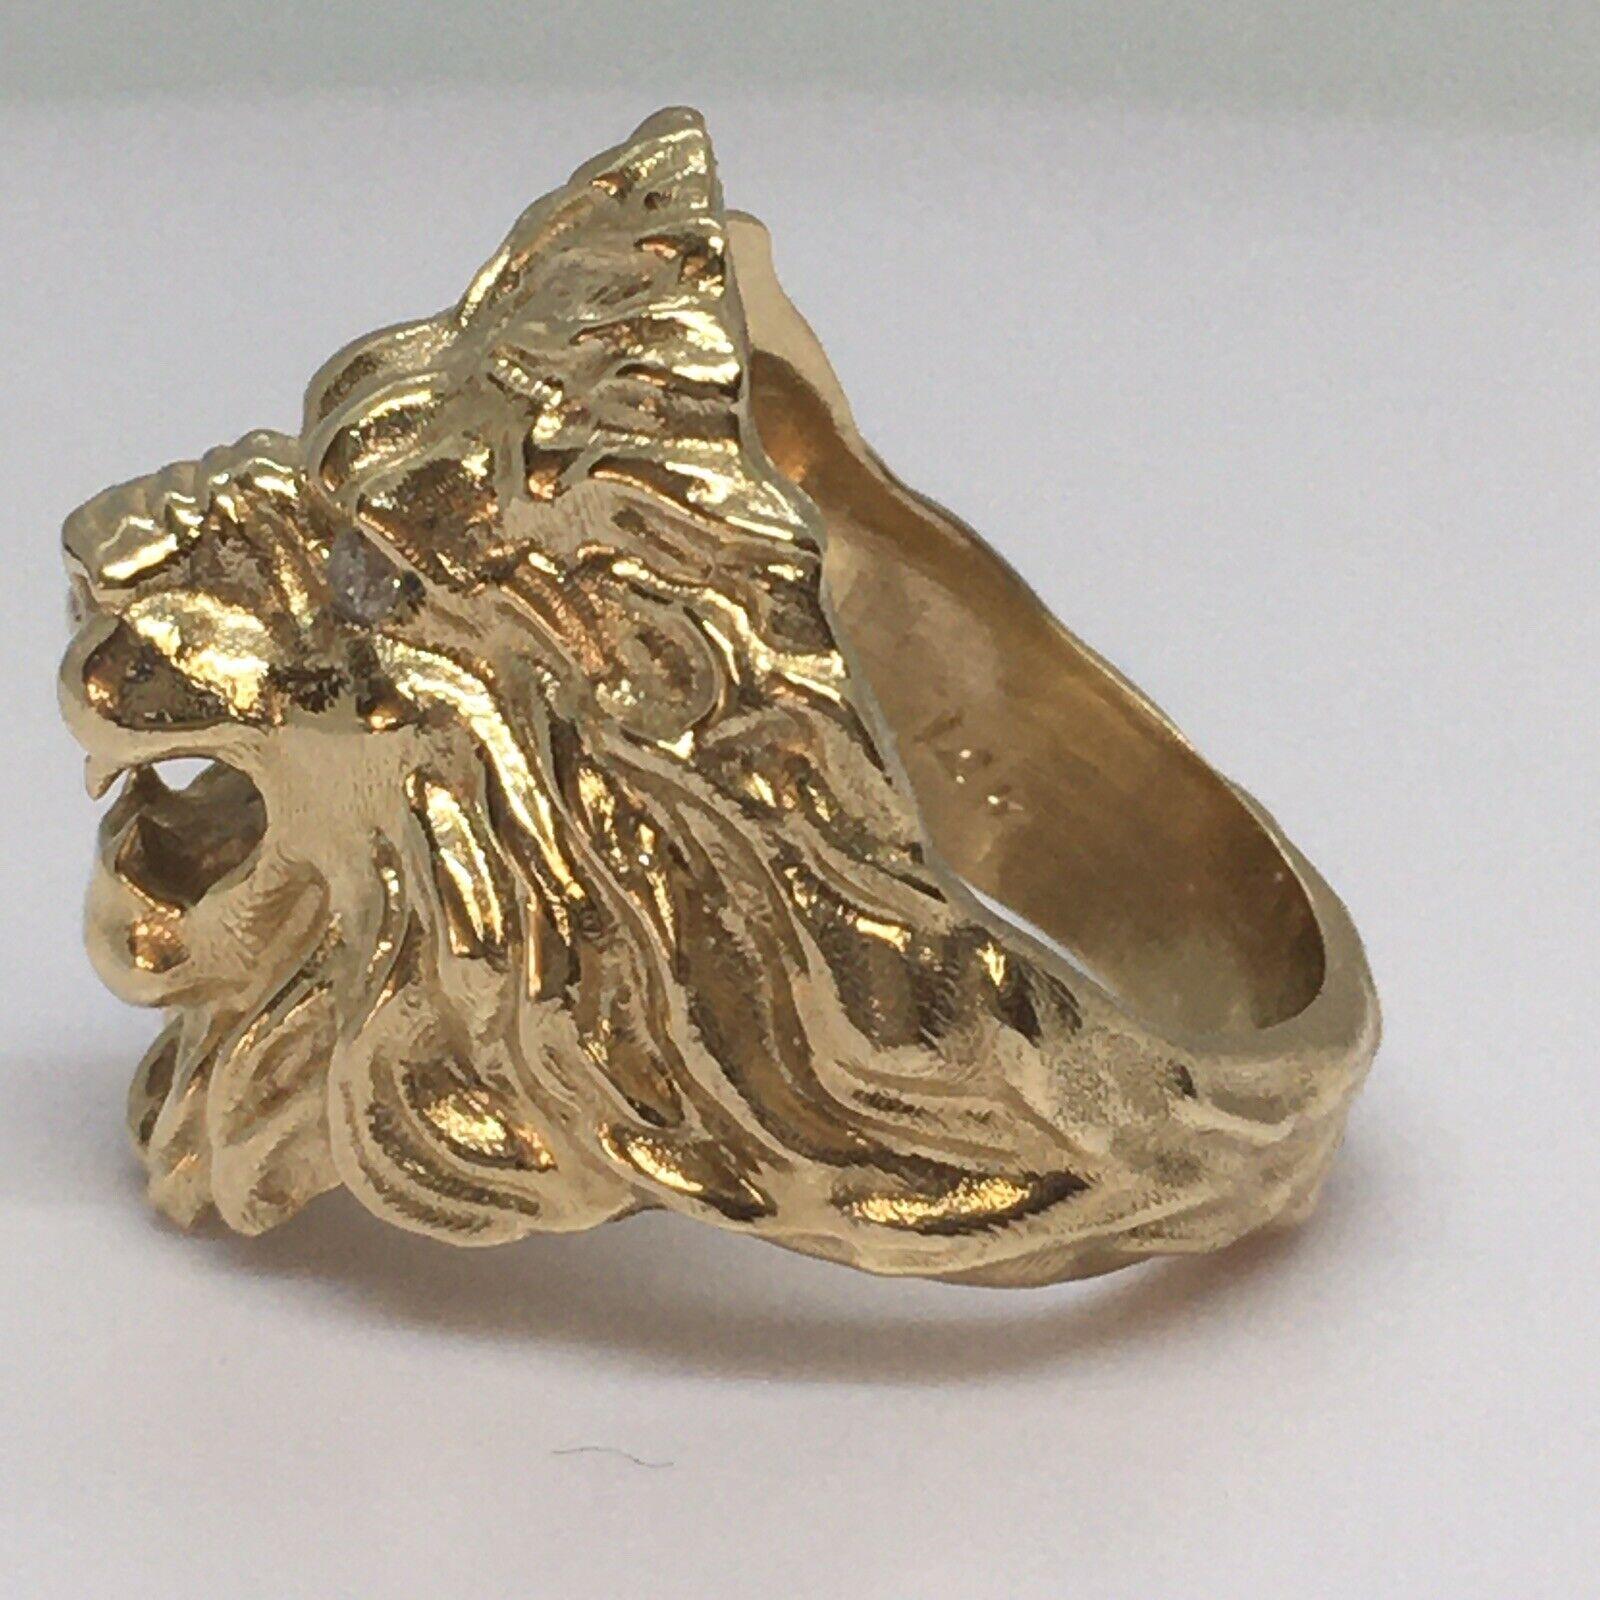 Lady’s Lion Face Diamond Ring 14K Yellow Gold

Size 5.5
Weighing 13.7 gr
Top size length. 0.75 inch
Made in our shop, Santa Monica, Ca.
Men's pinky or lady's ring
Made in our shop, Santa Monica, Ca